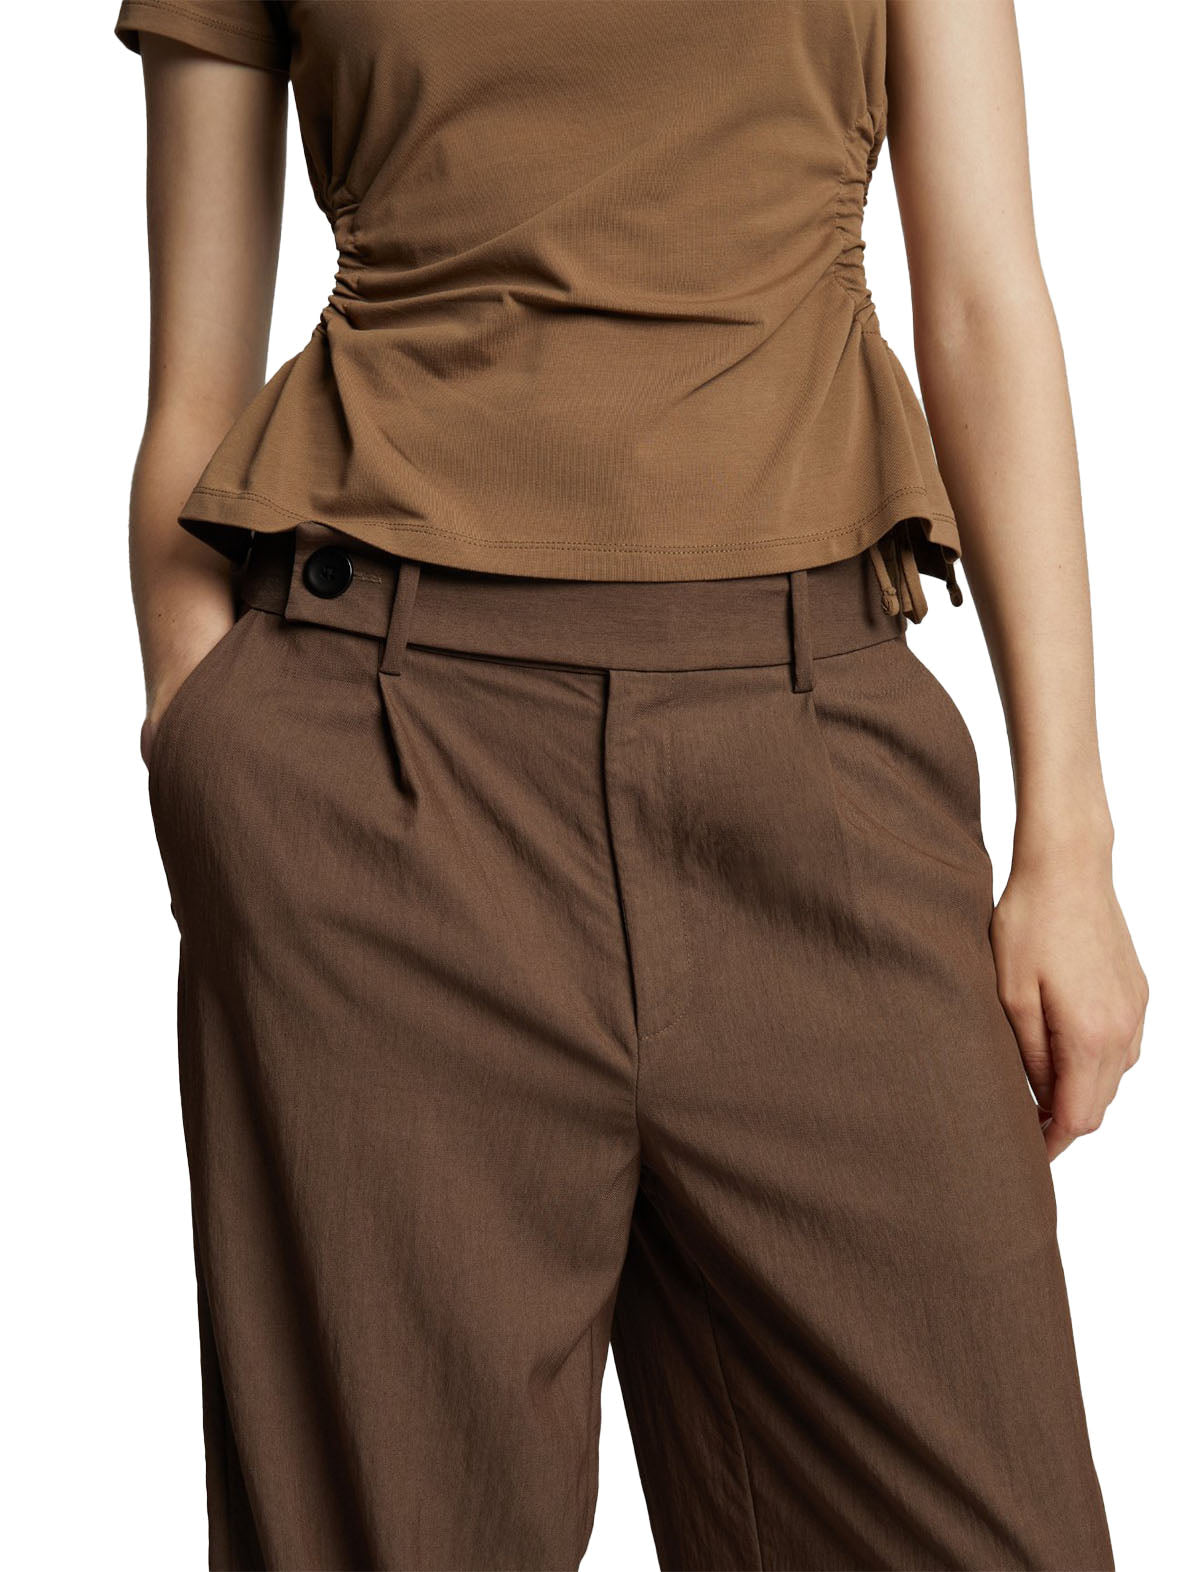 Proenza Schouler White Label Drapey Suiting Wide Leg Pant in Coffee